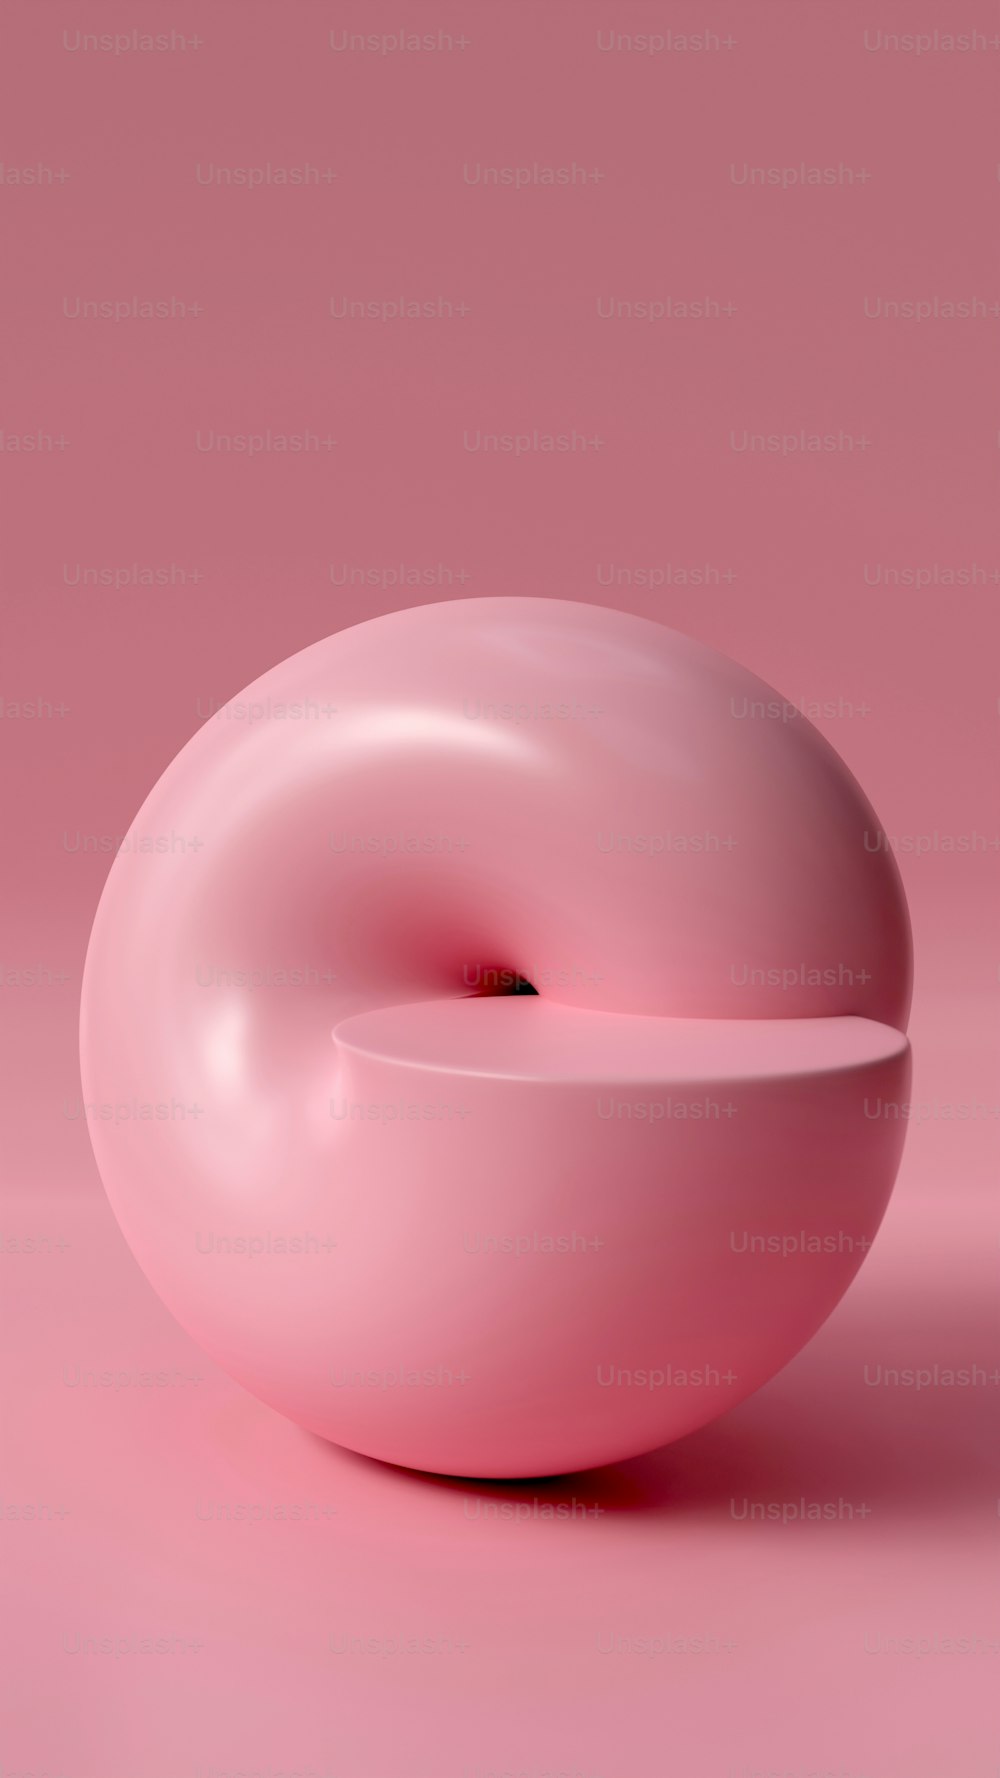 a pink donut sitting on top of a pink surface